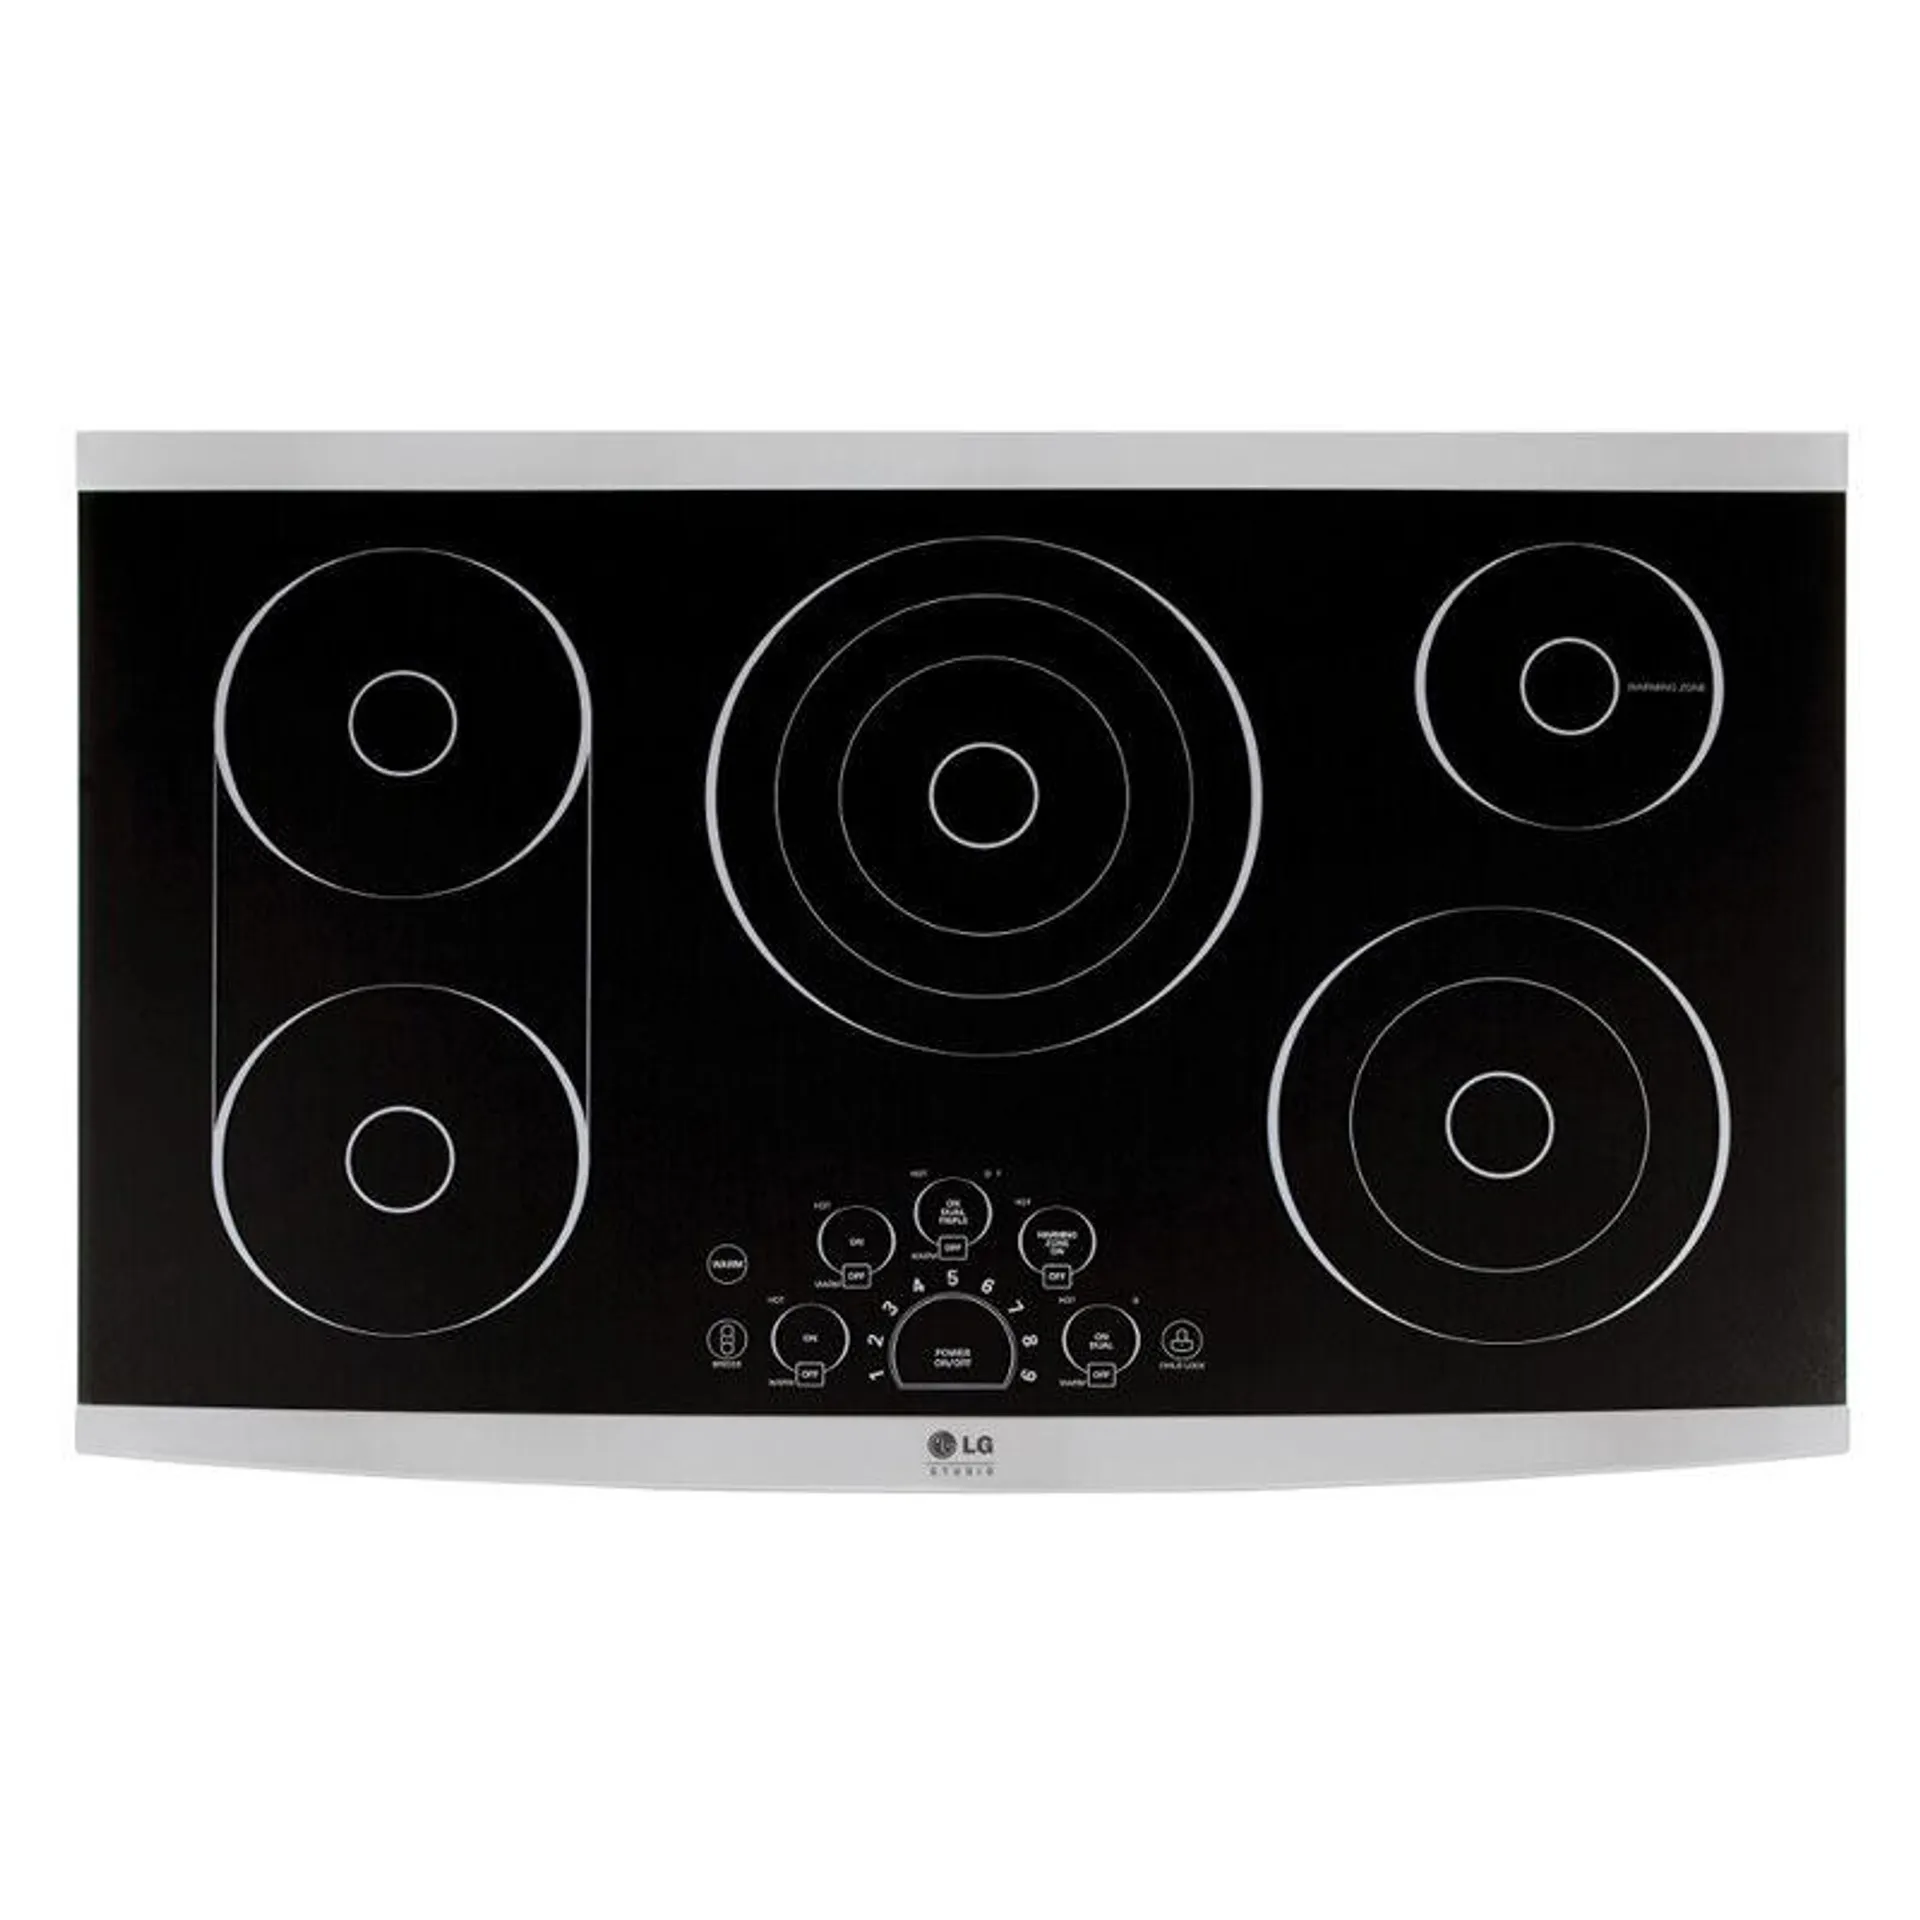 LG Studio 36 in. Electric Cooktop with 5 Smoothtop Burners - Stainless Steel